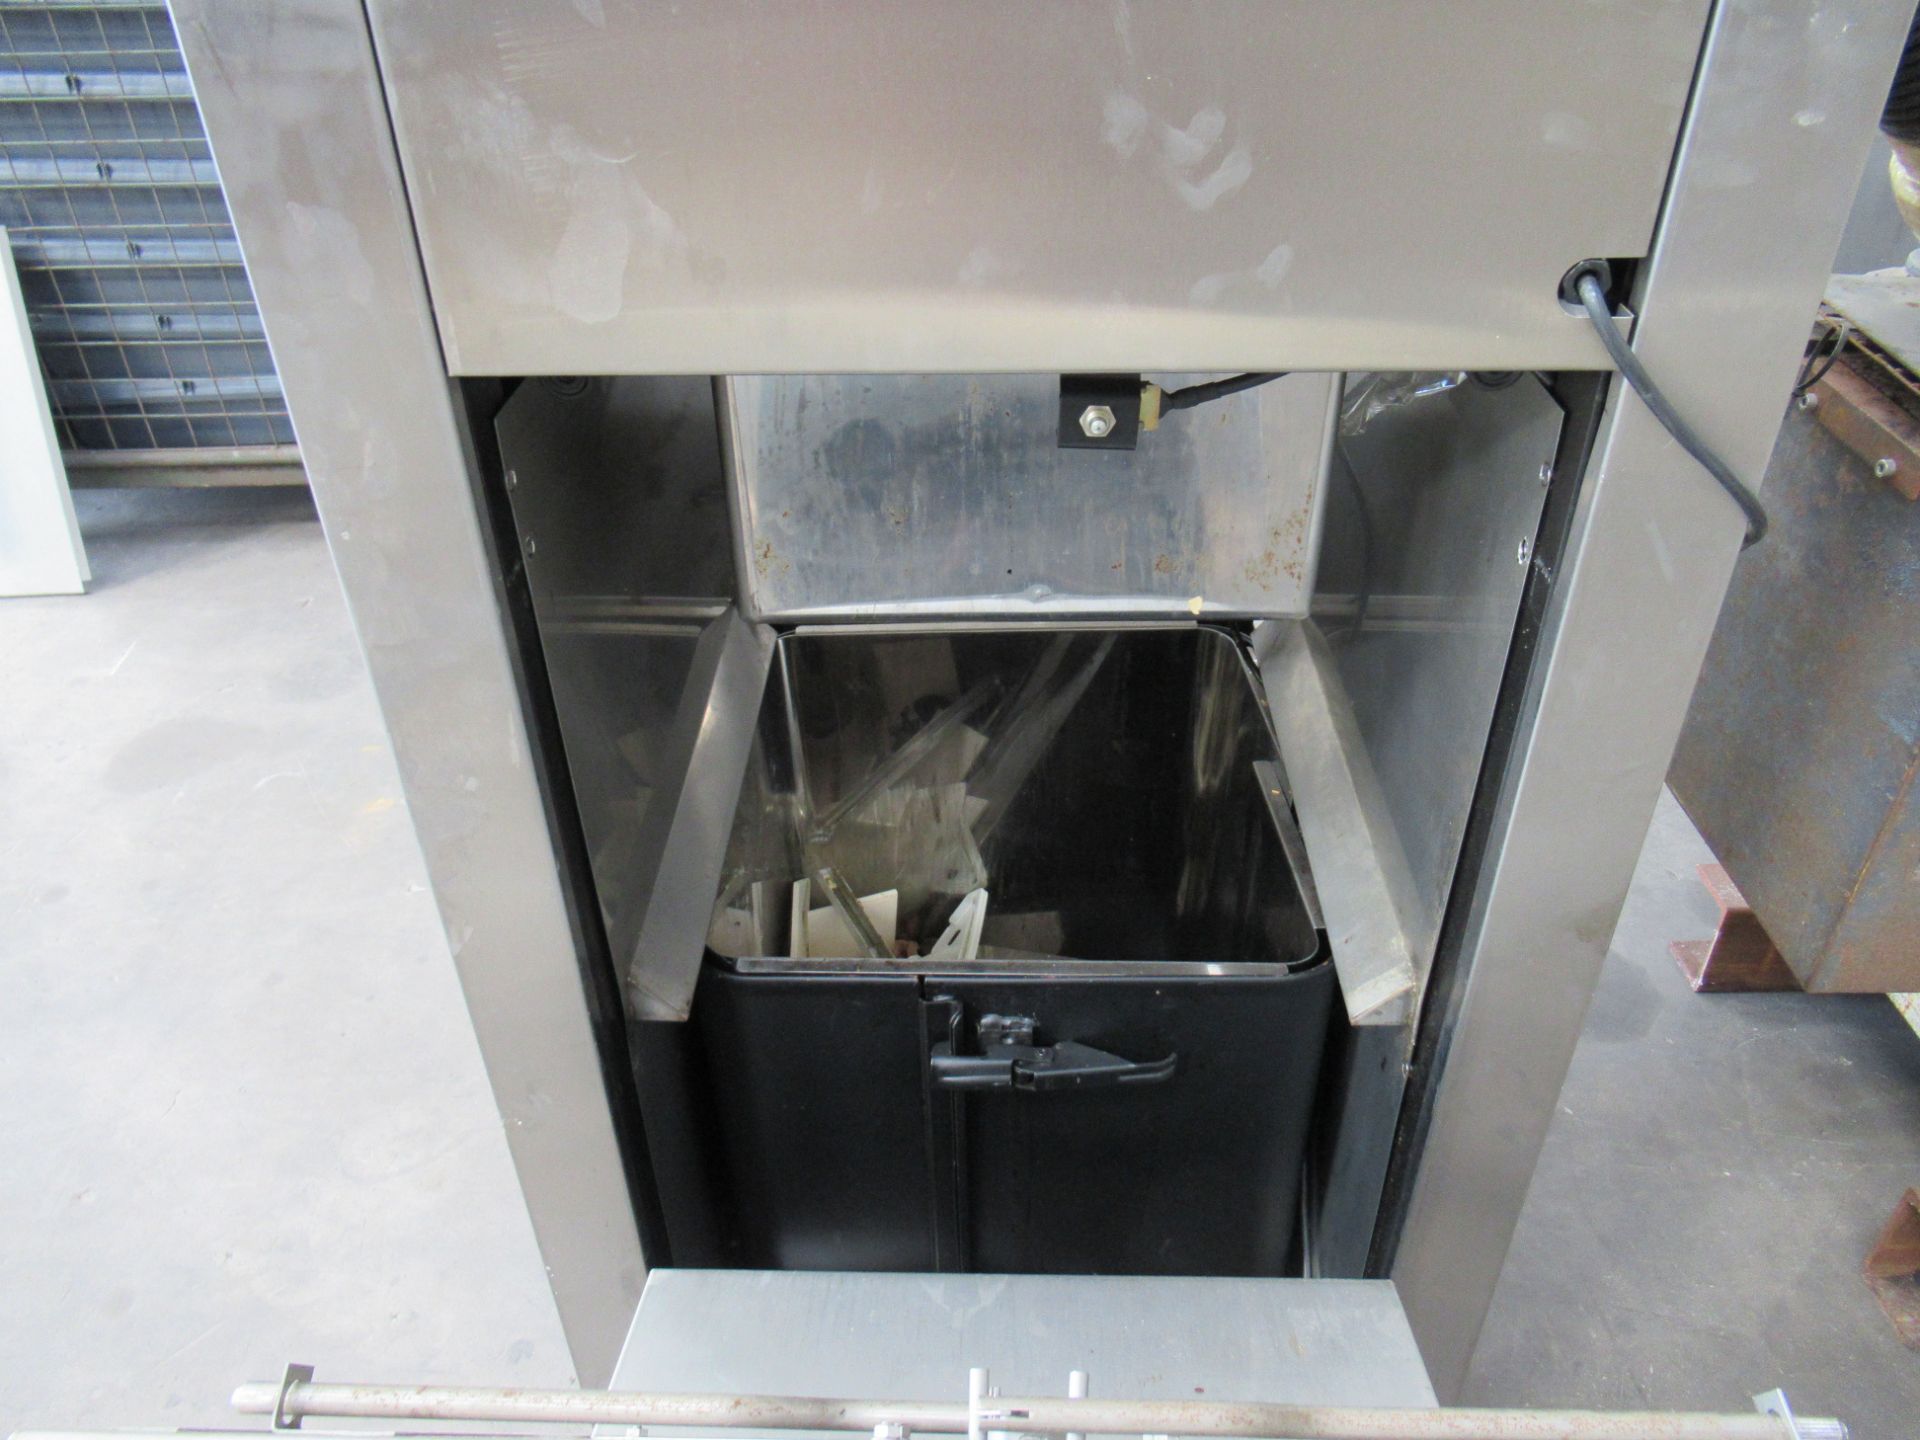 iMC CP501SF Stainless Steel Waste Compactor, 2.8A, 1.1kW, 3ph - Image 9 of 10